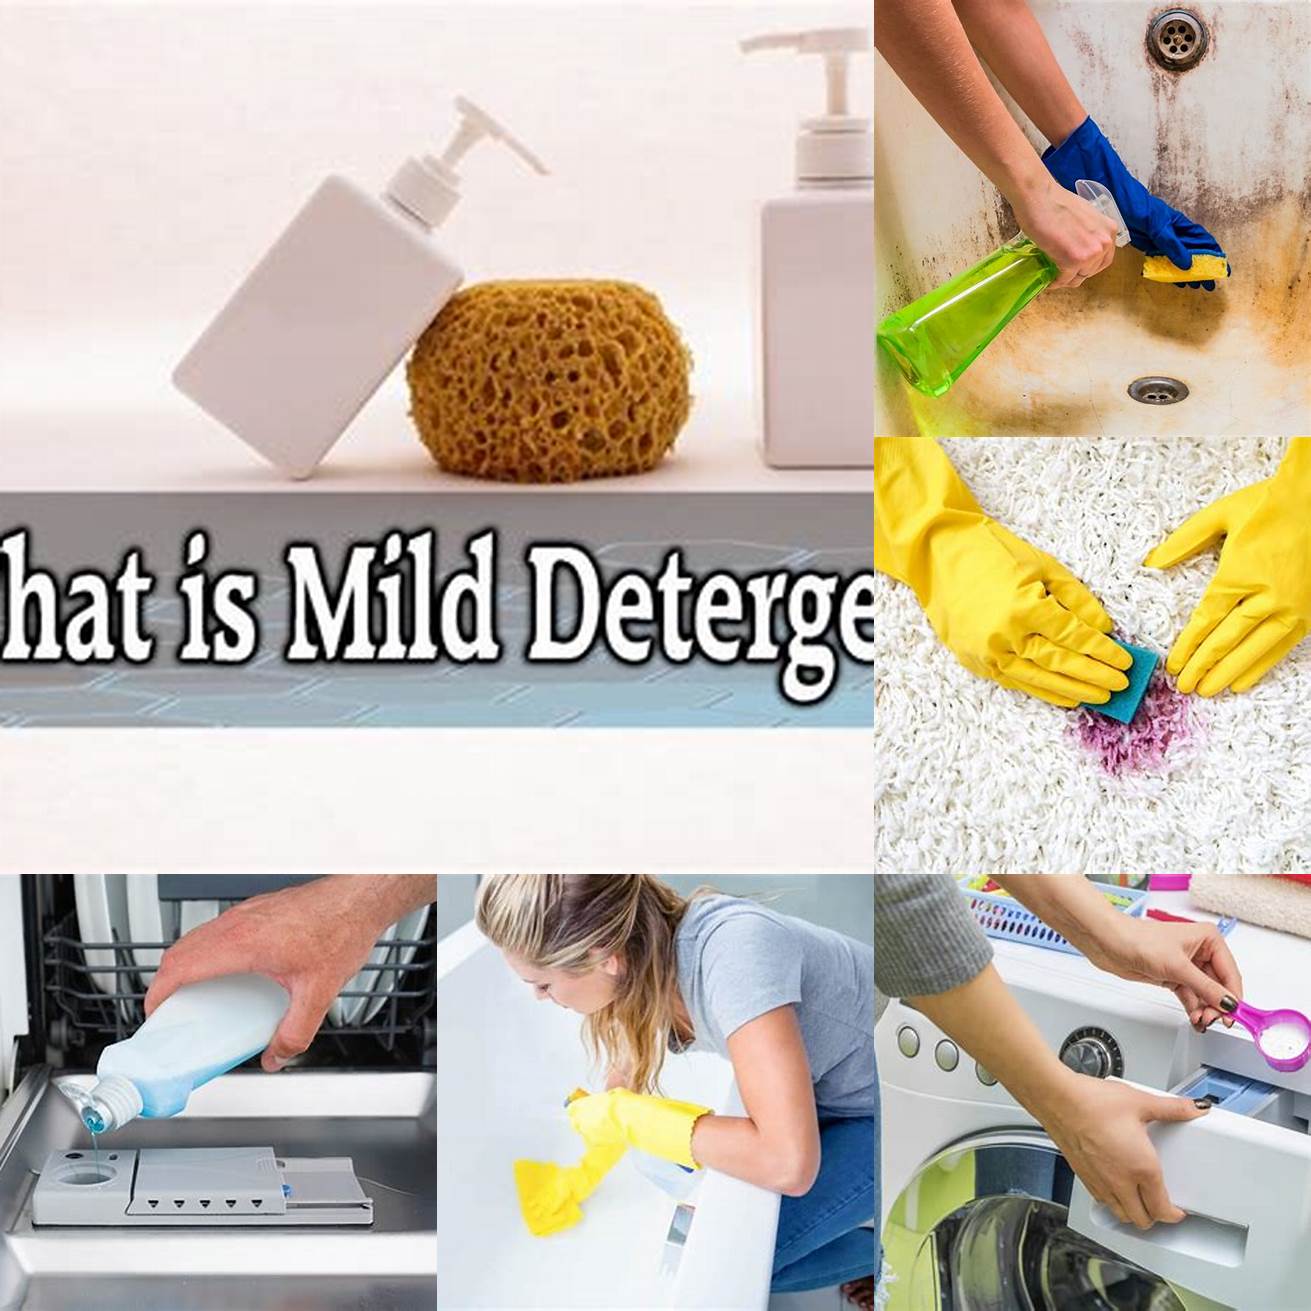 Use a mild detergent and water to clean any stains or spills